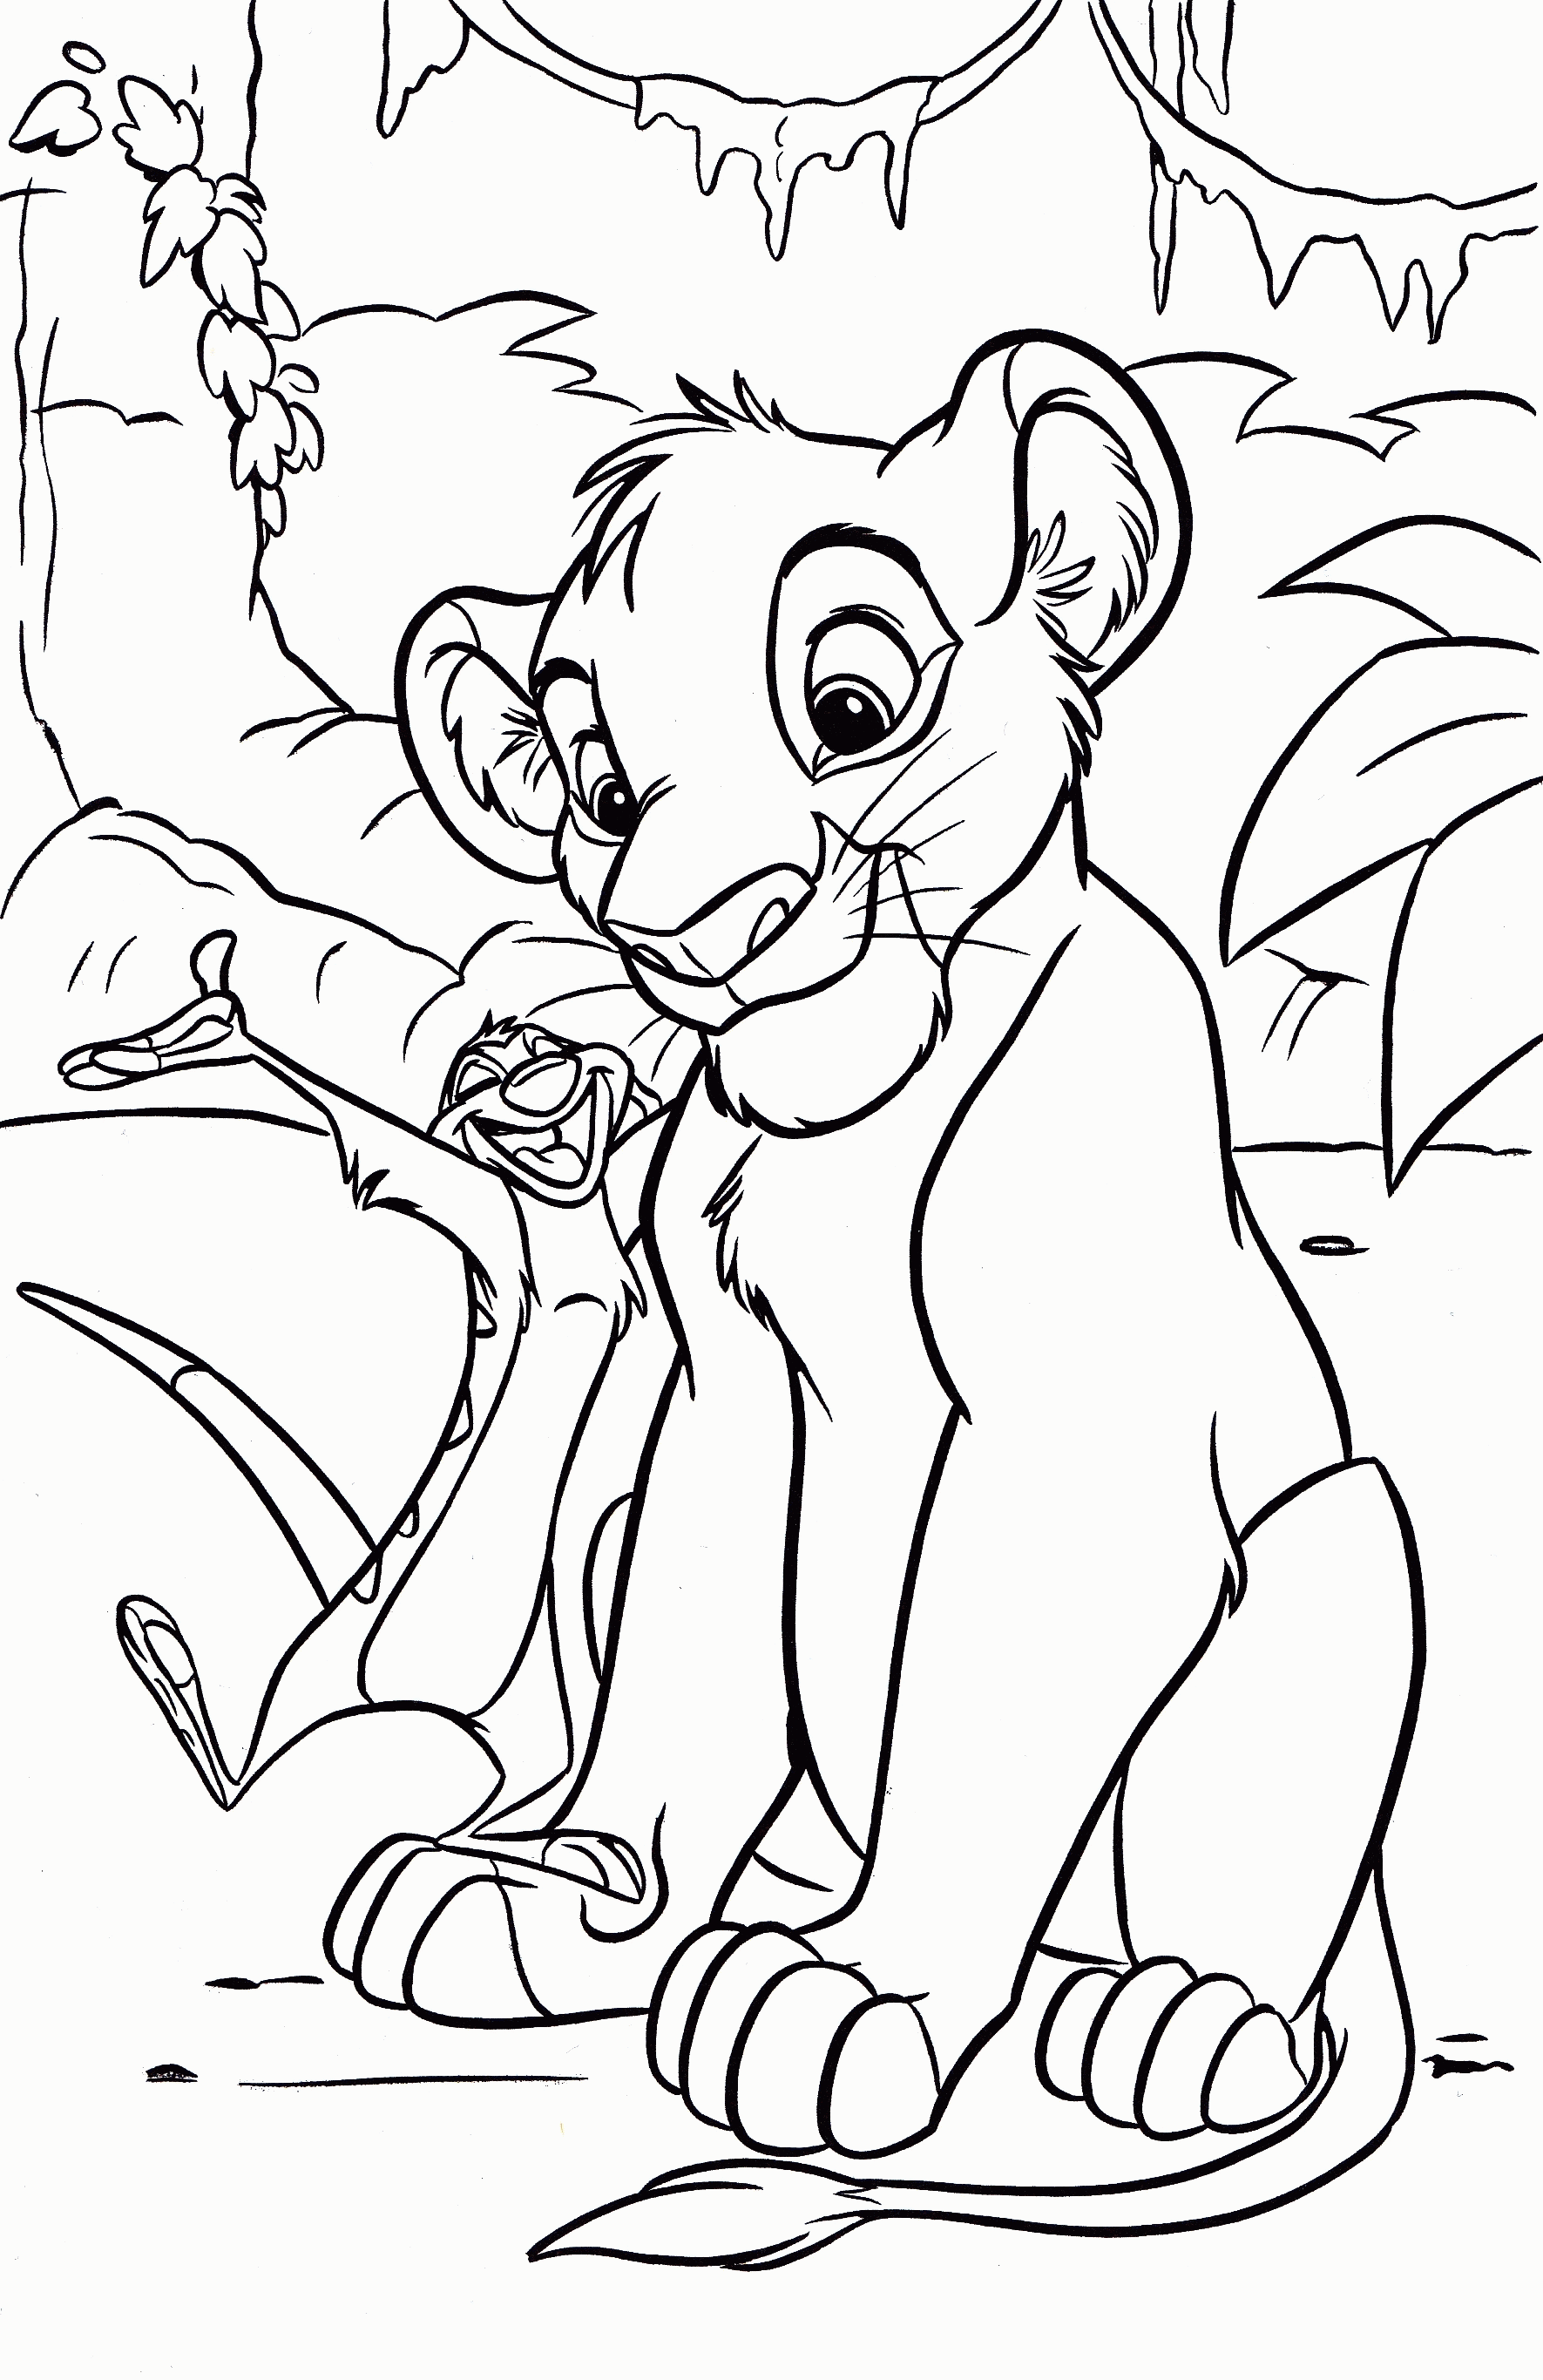 Walt Disney World Coloring Pages Free To Print   Coloring Home